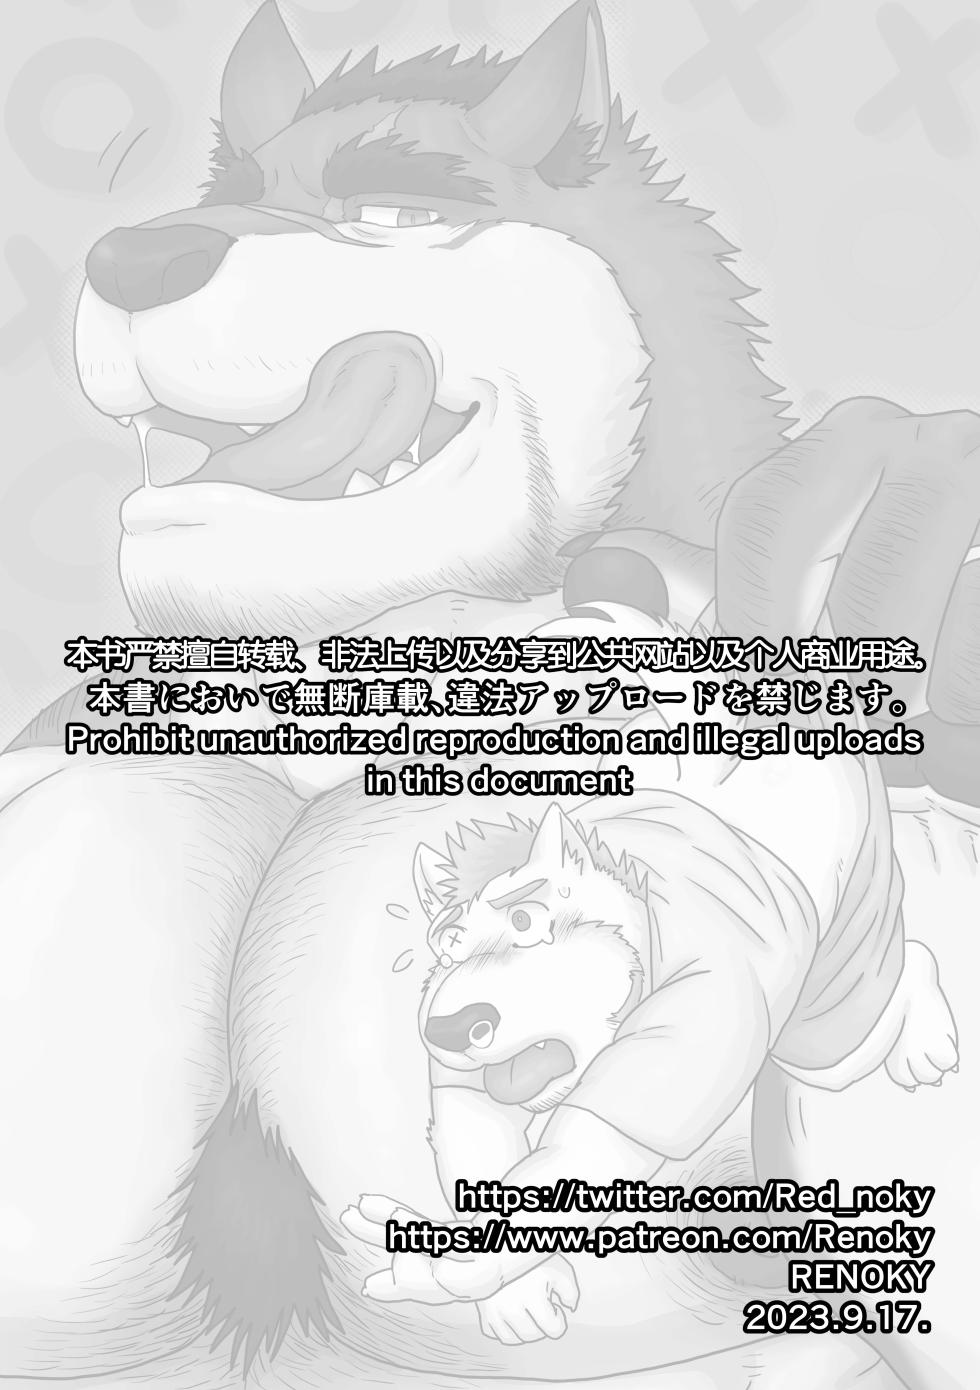 [Renoky] My hometown‘s uncle is a Horny Hung!! [English] [Decensored] [Digital] - Page 39